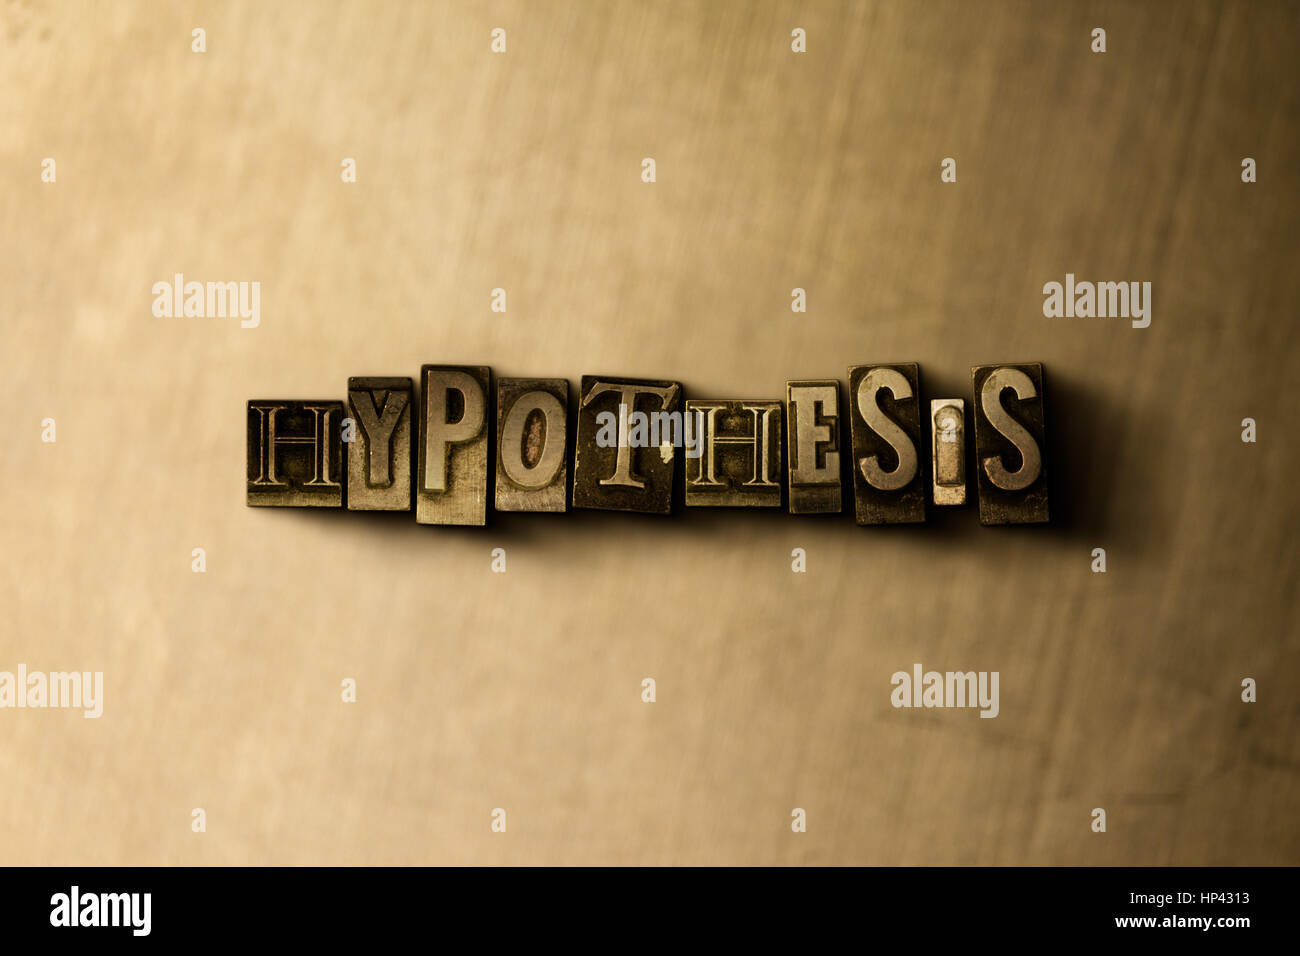 HYPOTHESIS - close-up of grungy vintage typeset word on metal backdrop. Royalty free stock illustration.  Can be used for online banner ads and direct Stock Photo